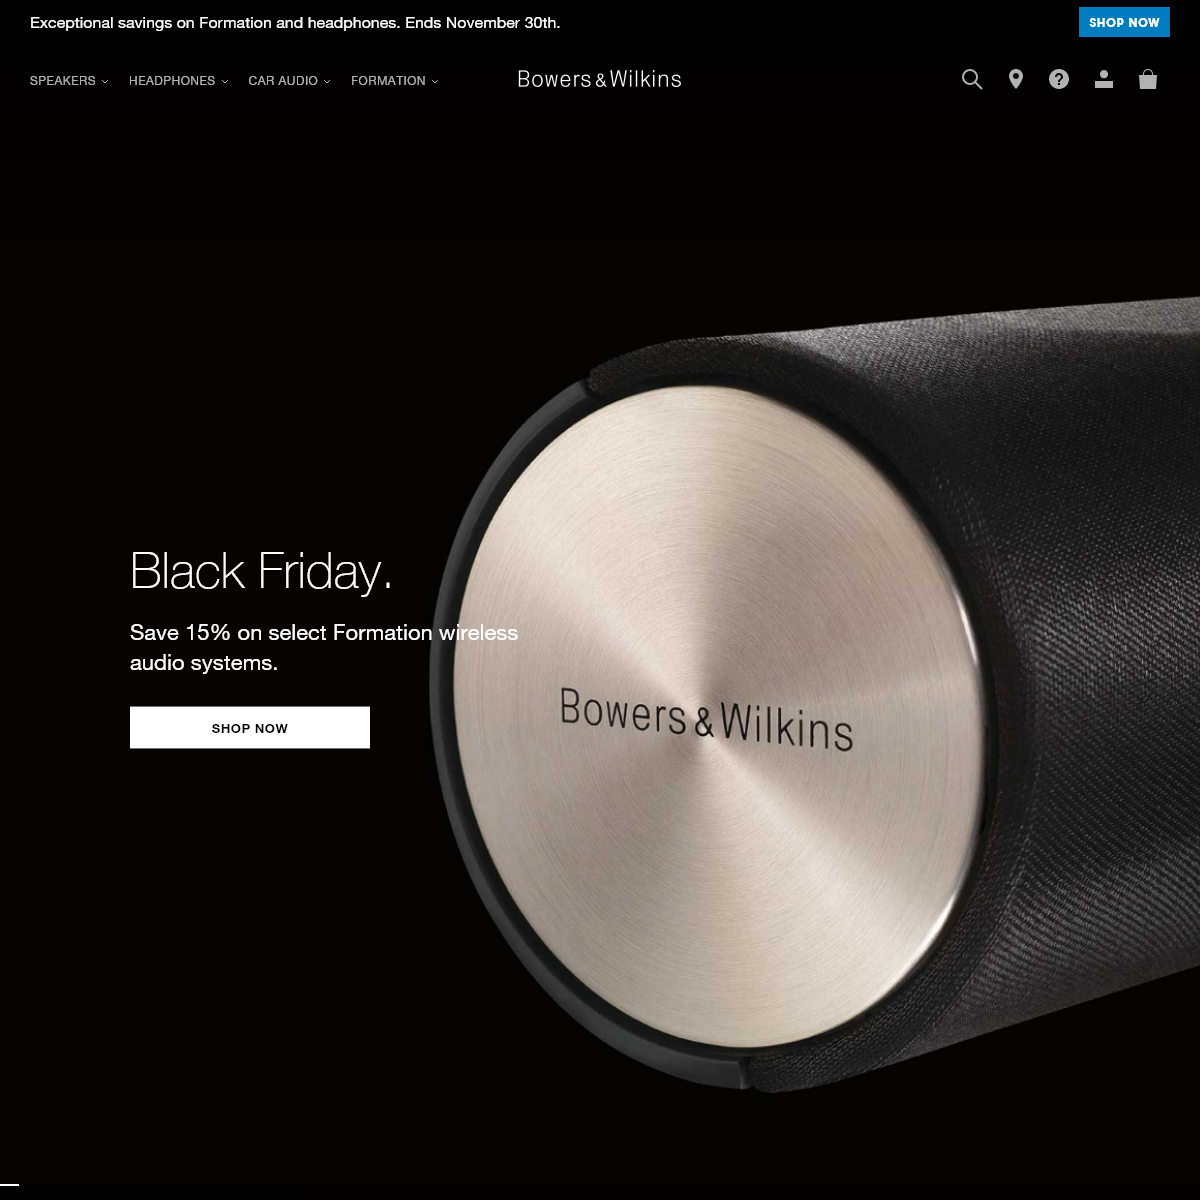 A complete backup of bowers-wilkins.com